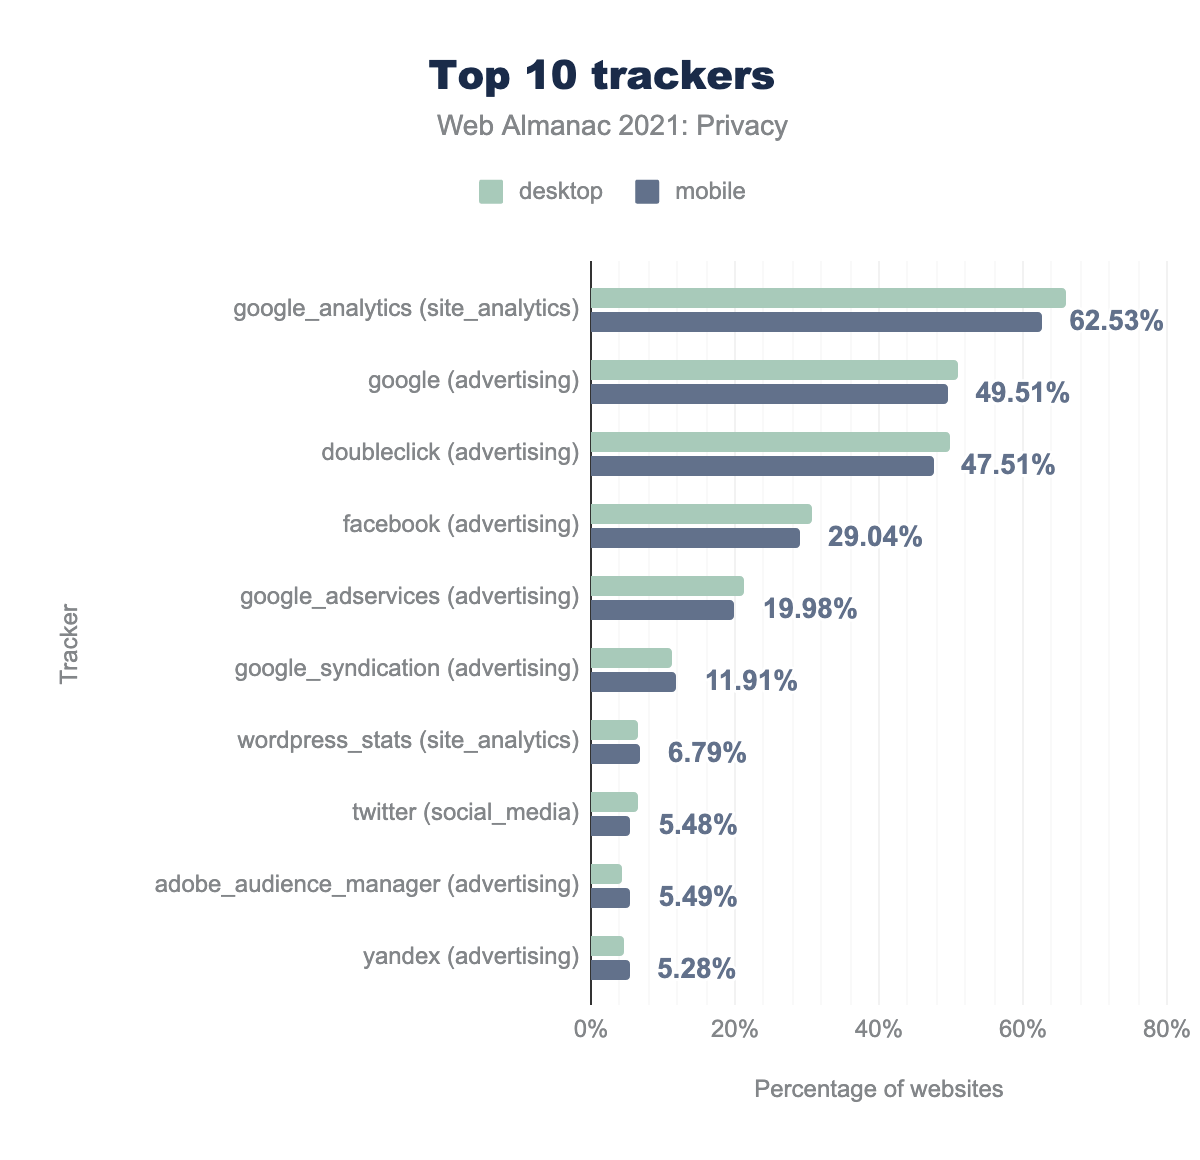 10 most popular trackers and their prevalence.